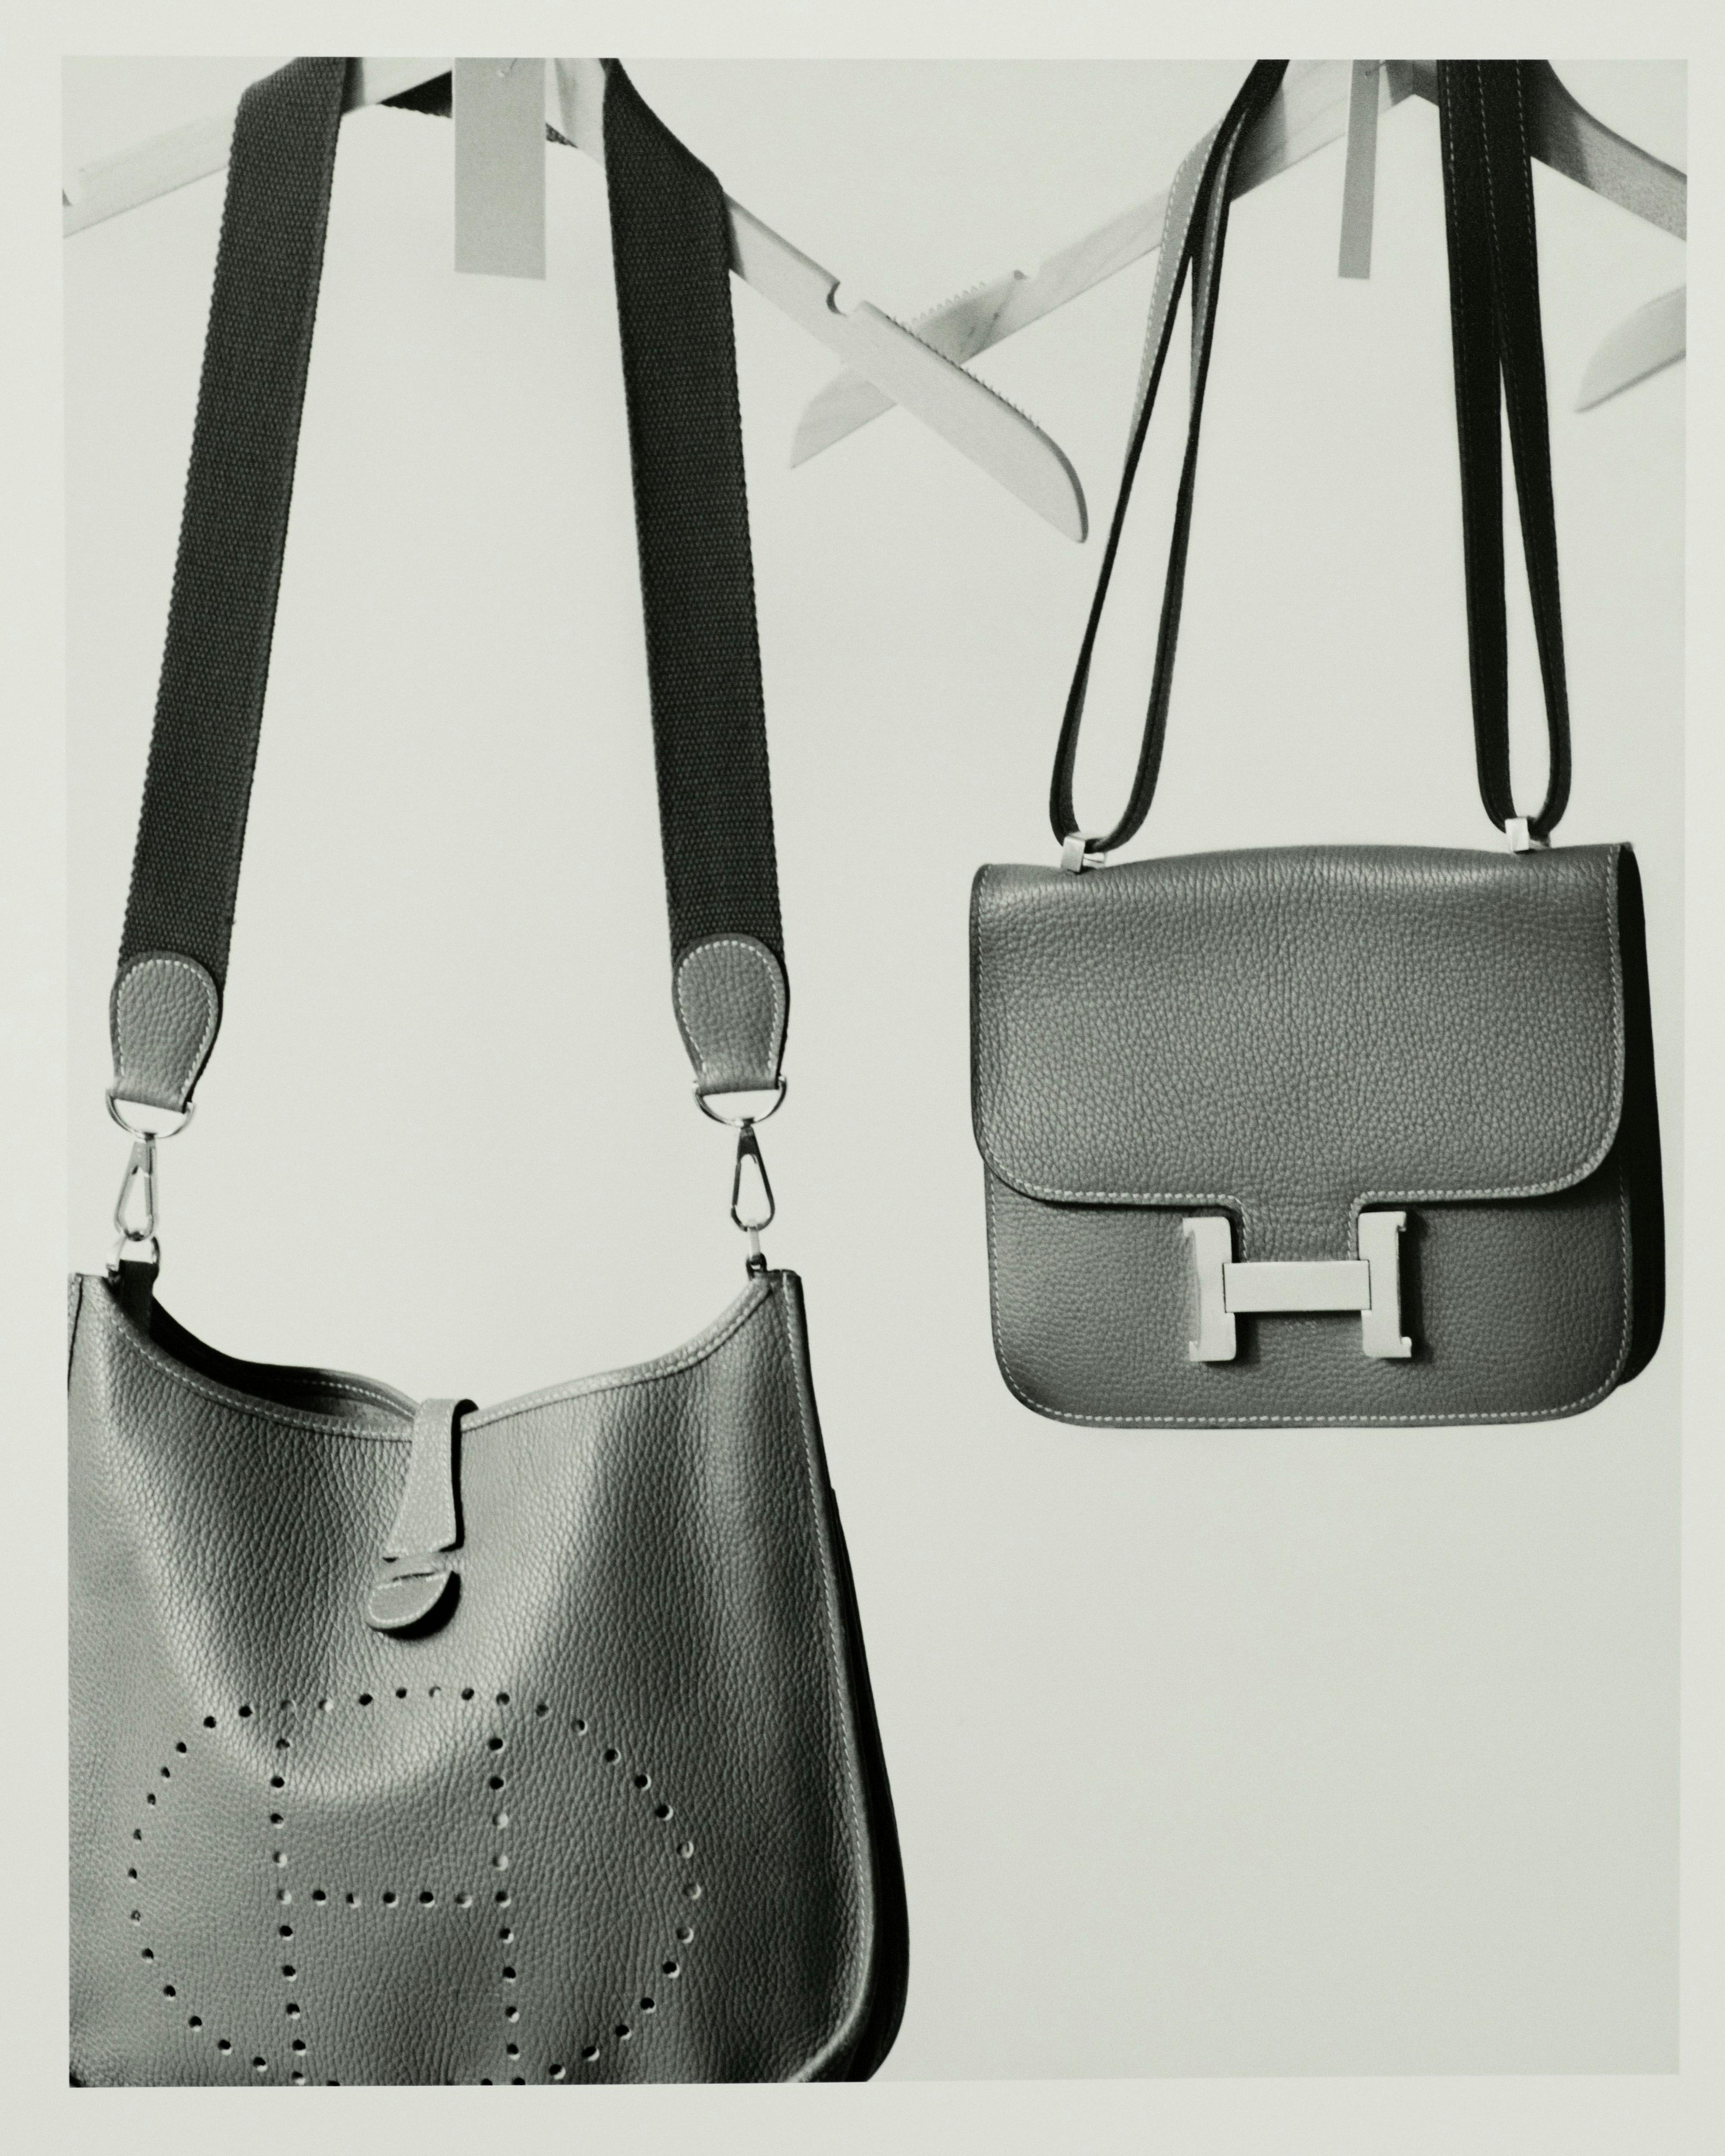 Vintage bags by Hermès from the Albright Fashion Library. The Evelyne bag, at left, was first presented in 1978 and is designed to carry equestrian grooming equipment. The Constance, introduced in the Fifties, gained popularity through its association with Jacqueline Kennedy Onassis and is now a staple of the house.